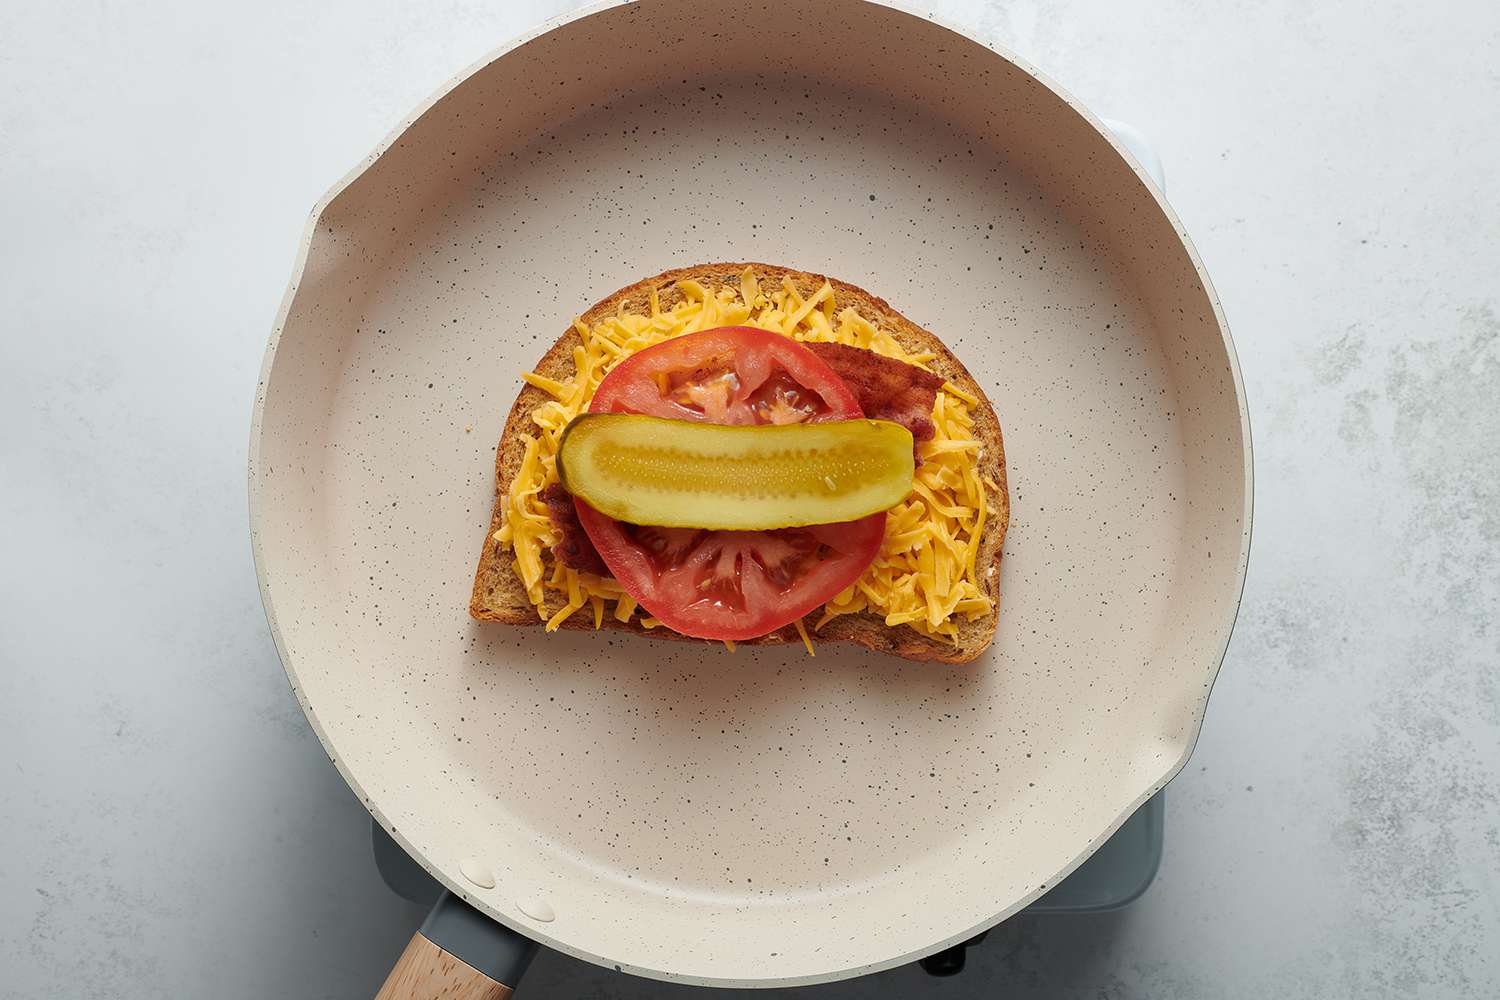 shredded cheese, tomato, bacon and pickle on a slice of bread